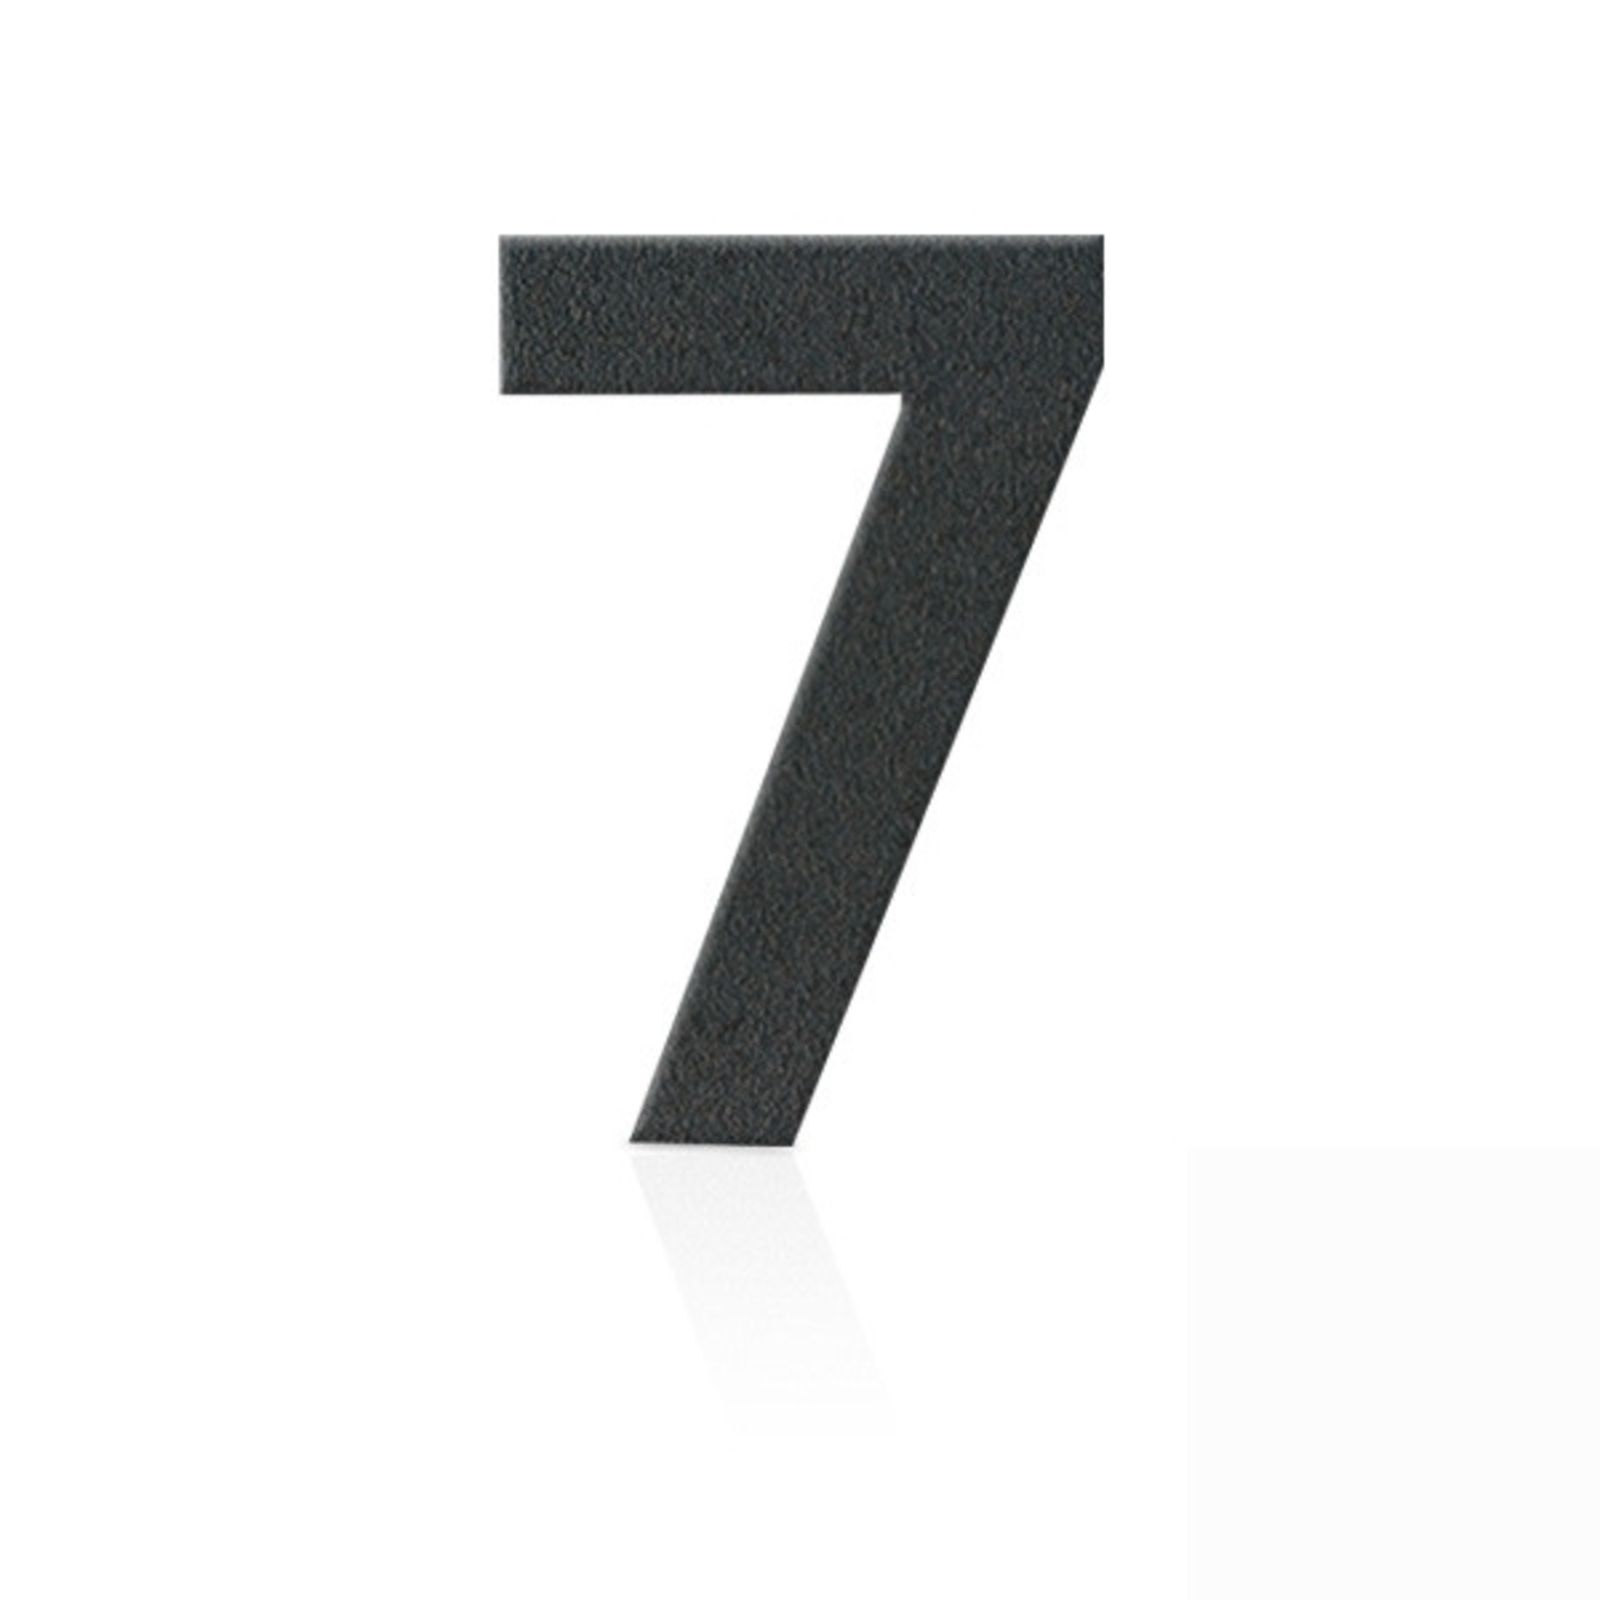 Stainless house numbers figure 7,graphite grey